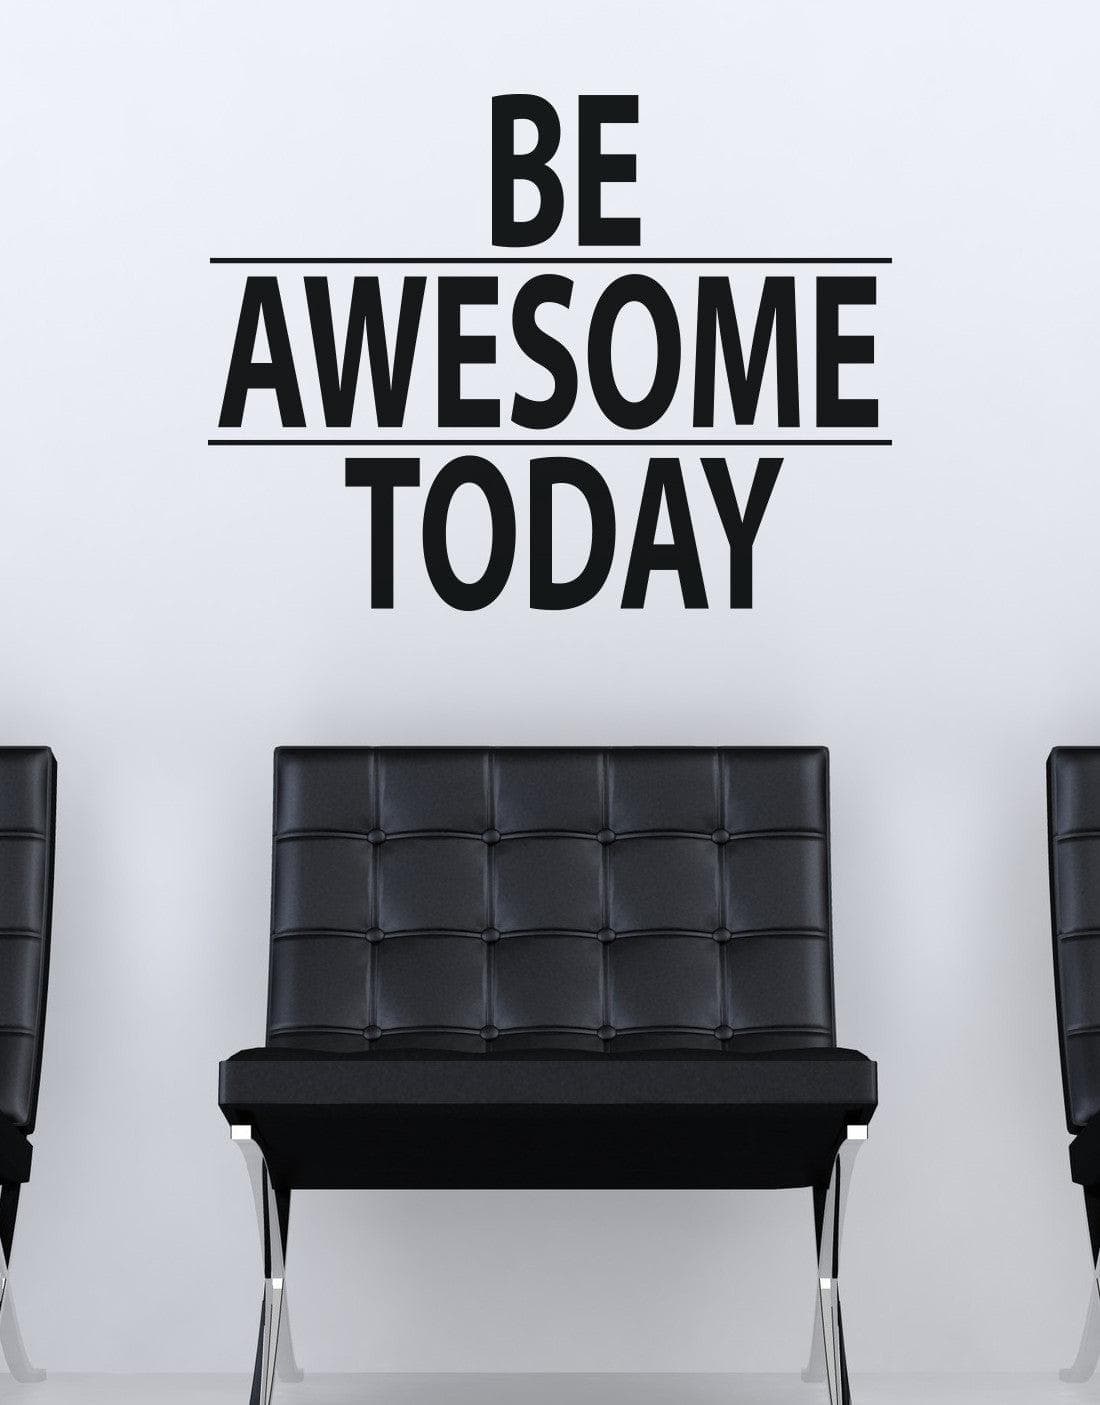 A black text decal saying "BE AWESOME TODAY" on a white wall over a black chair. 